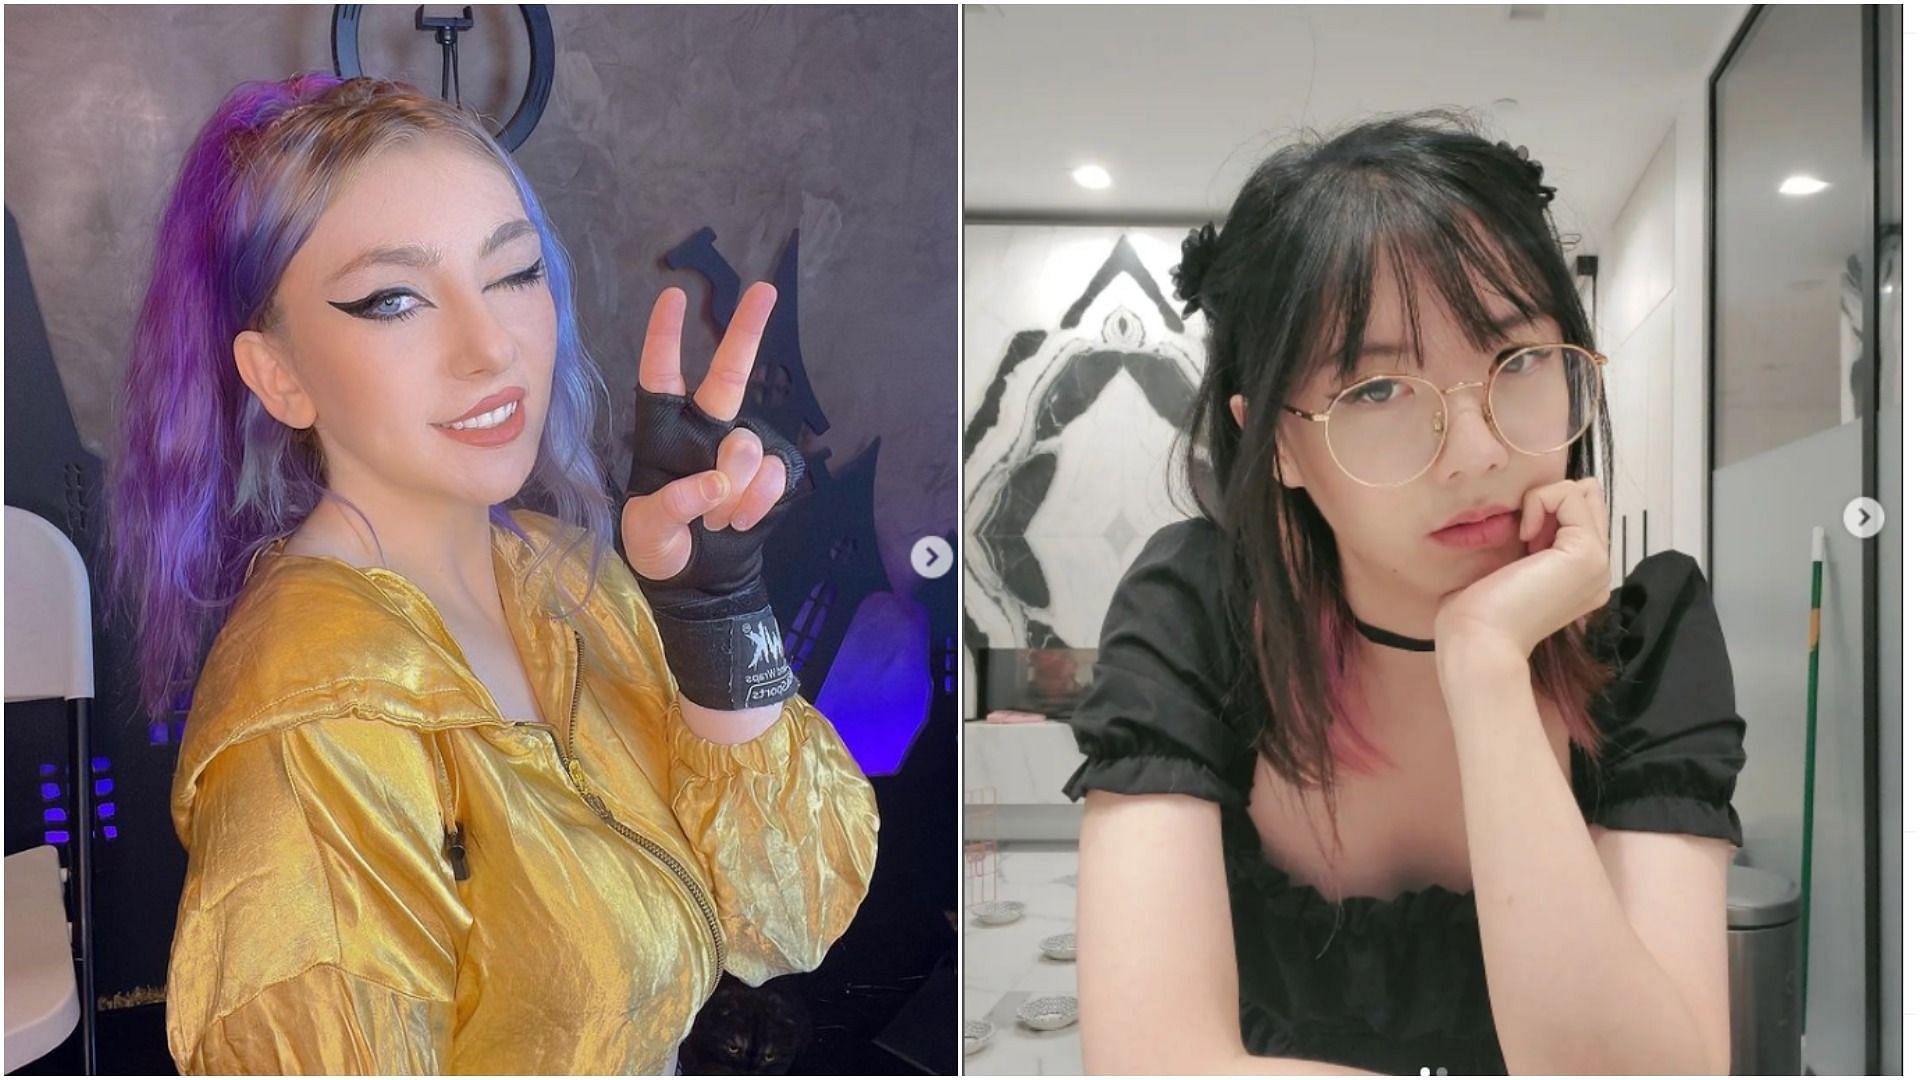 JustaMinx reacts to Lilypichu drawing her during their girls&#039; trip (Image via- JustaMinx, LilyPichu/Instagram)